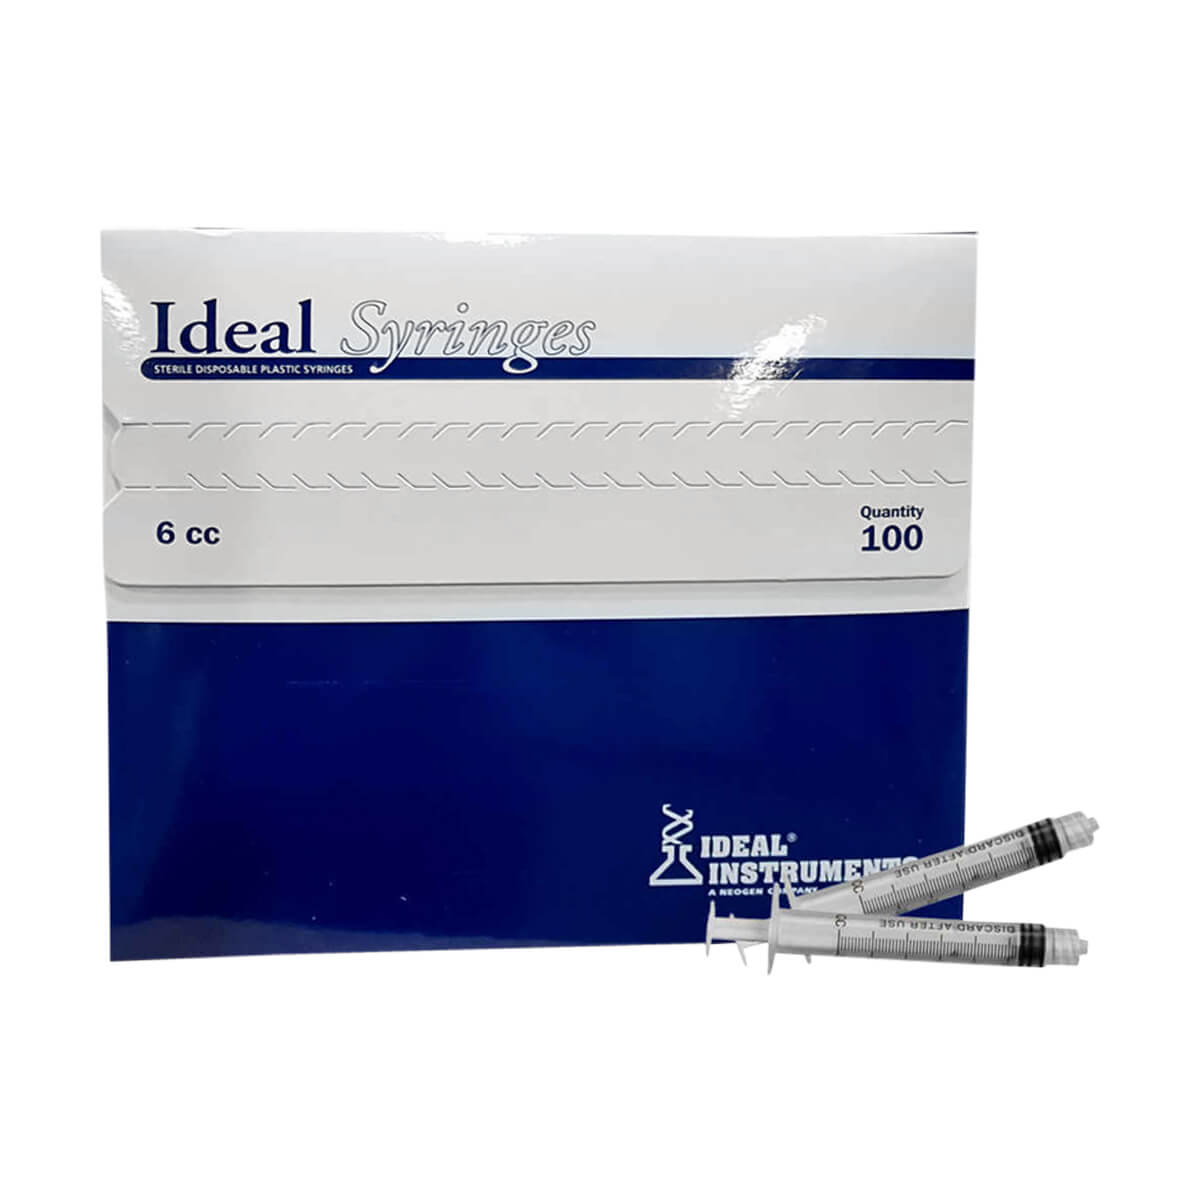 Disposable Syringes 100 pack - 6cc